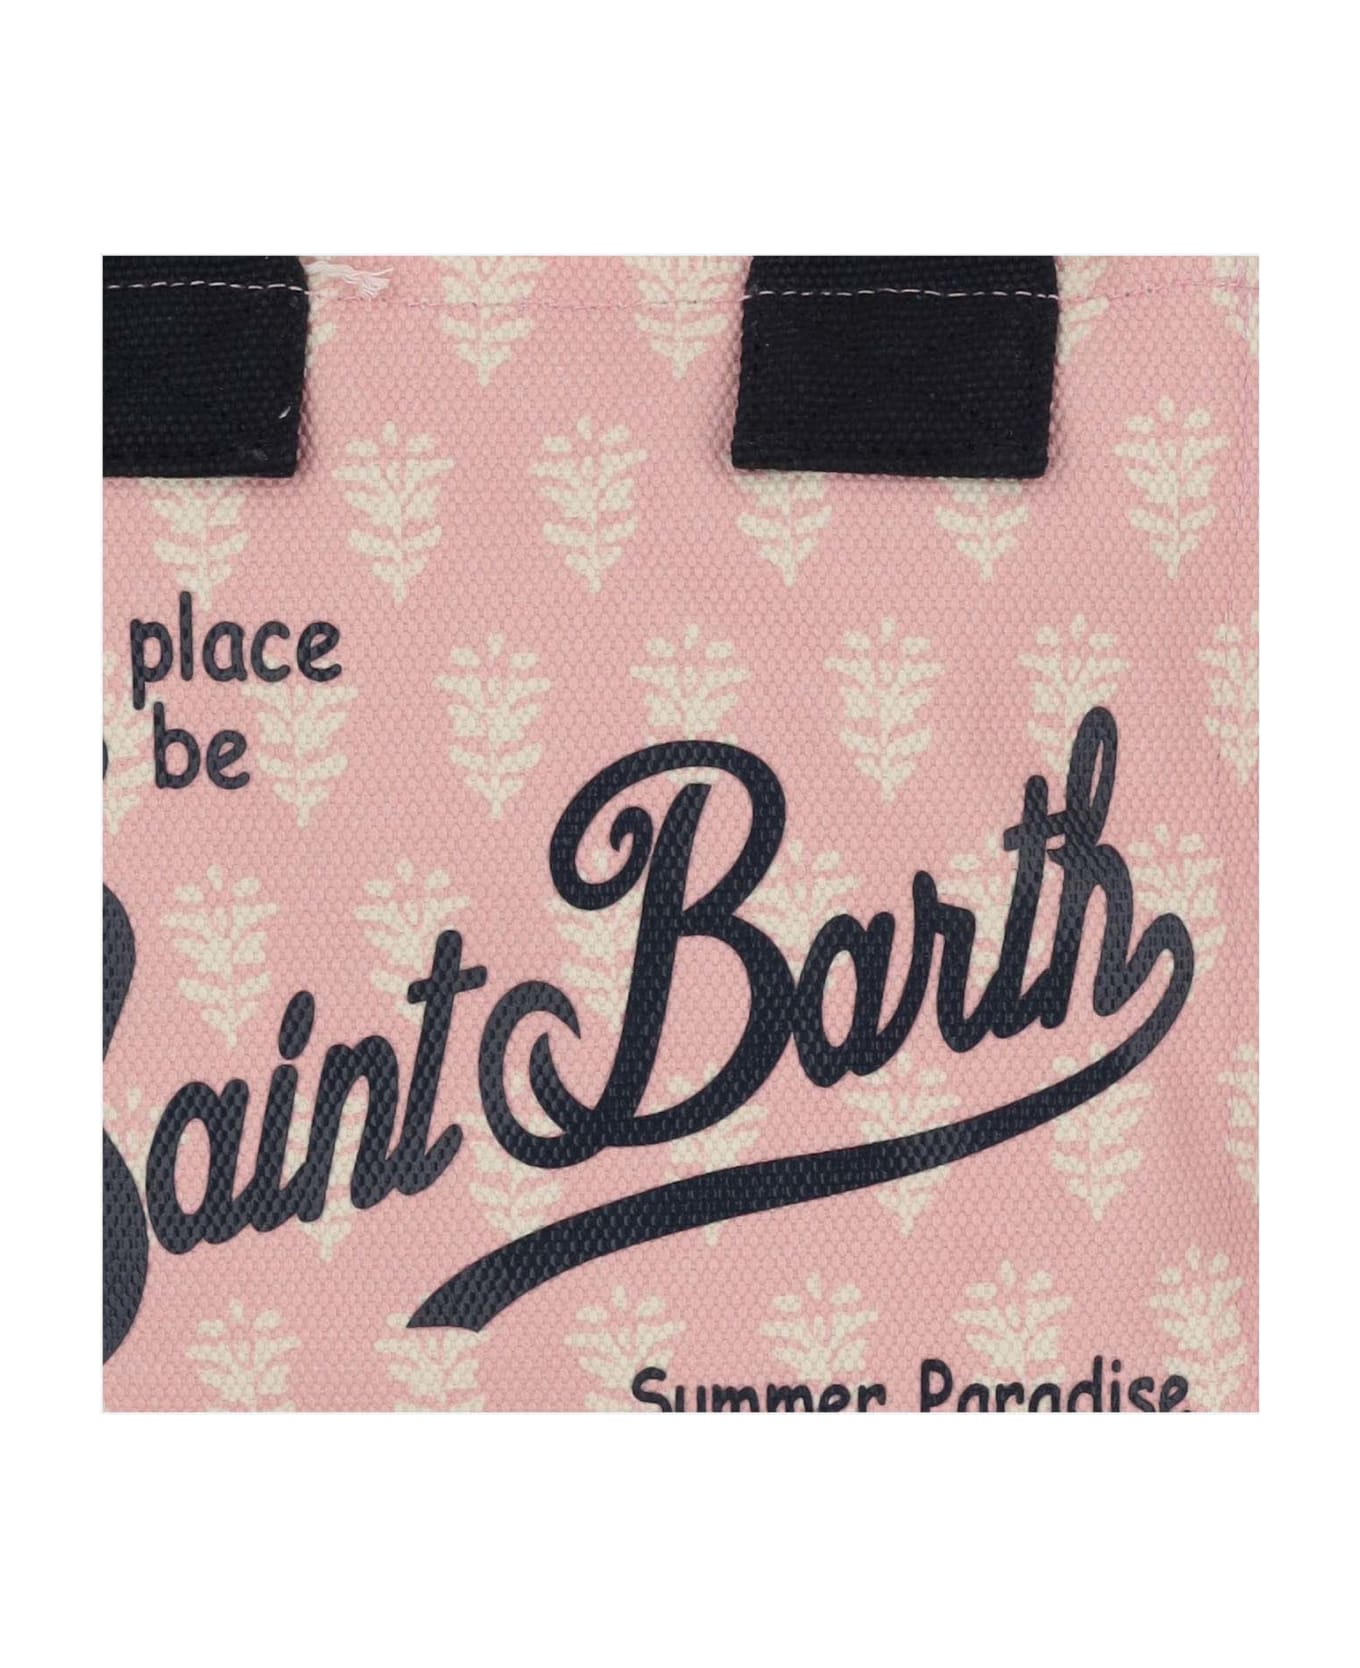 MC2 Saint Barth Colette Tote Bag With Logo - Red トートバッグ